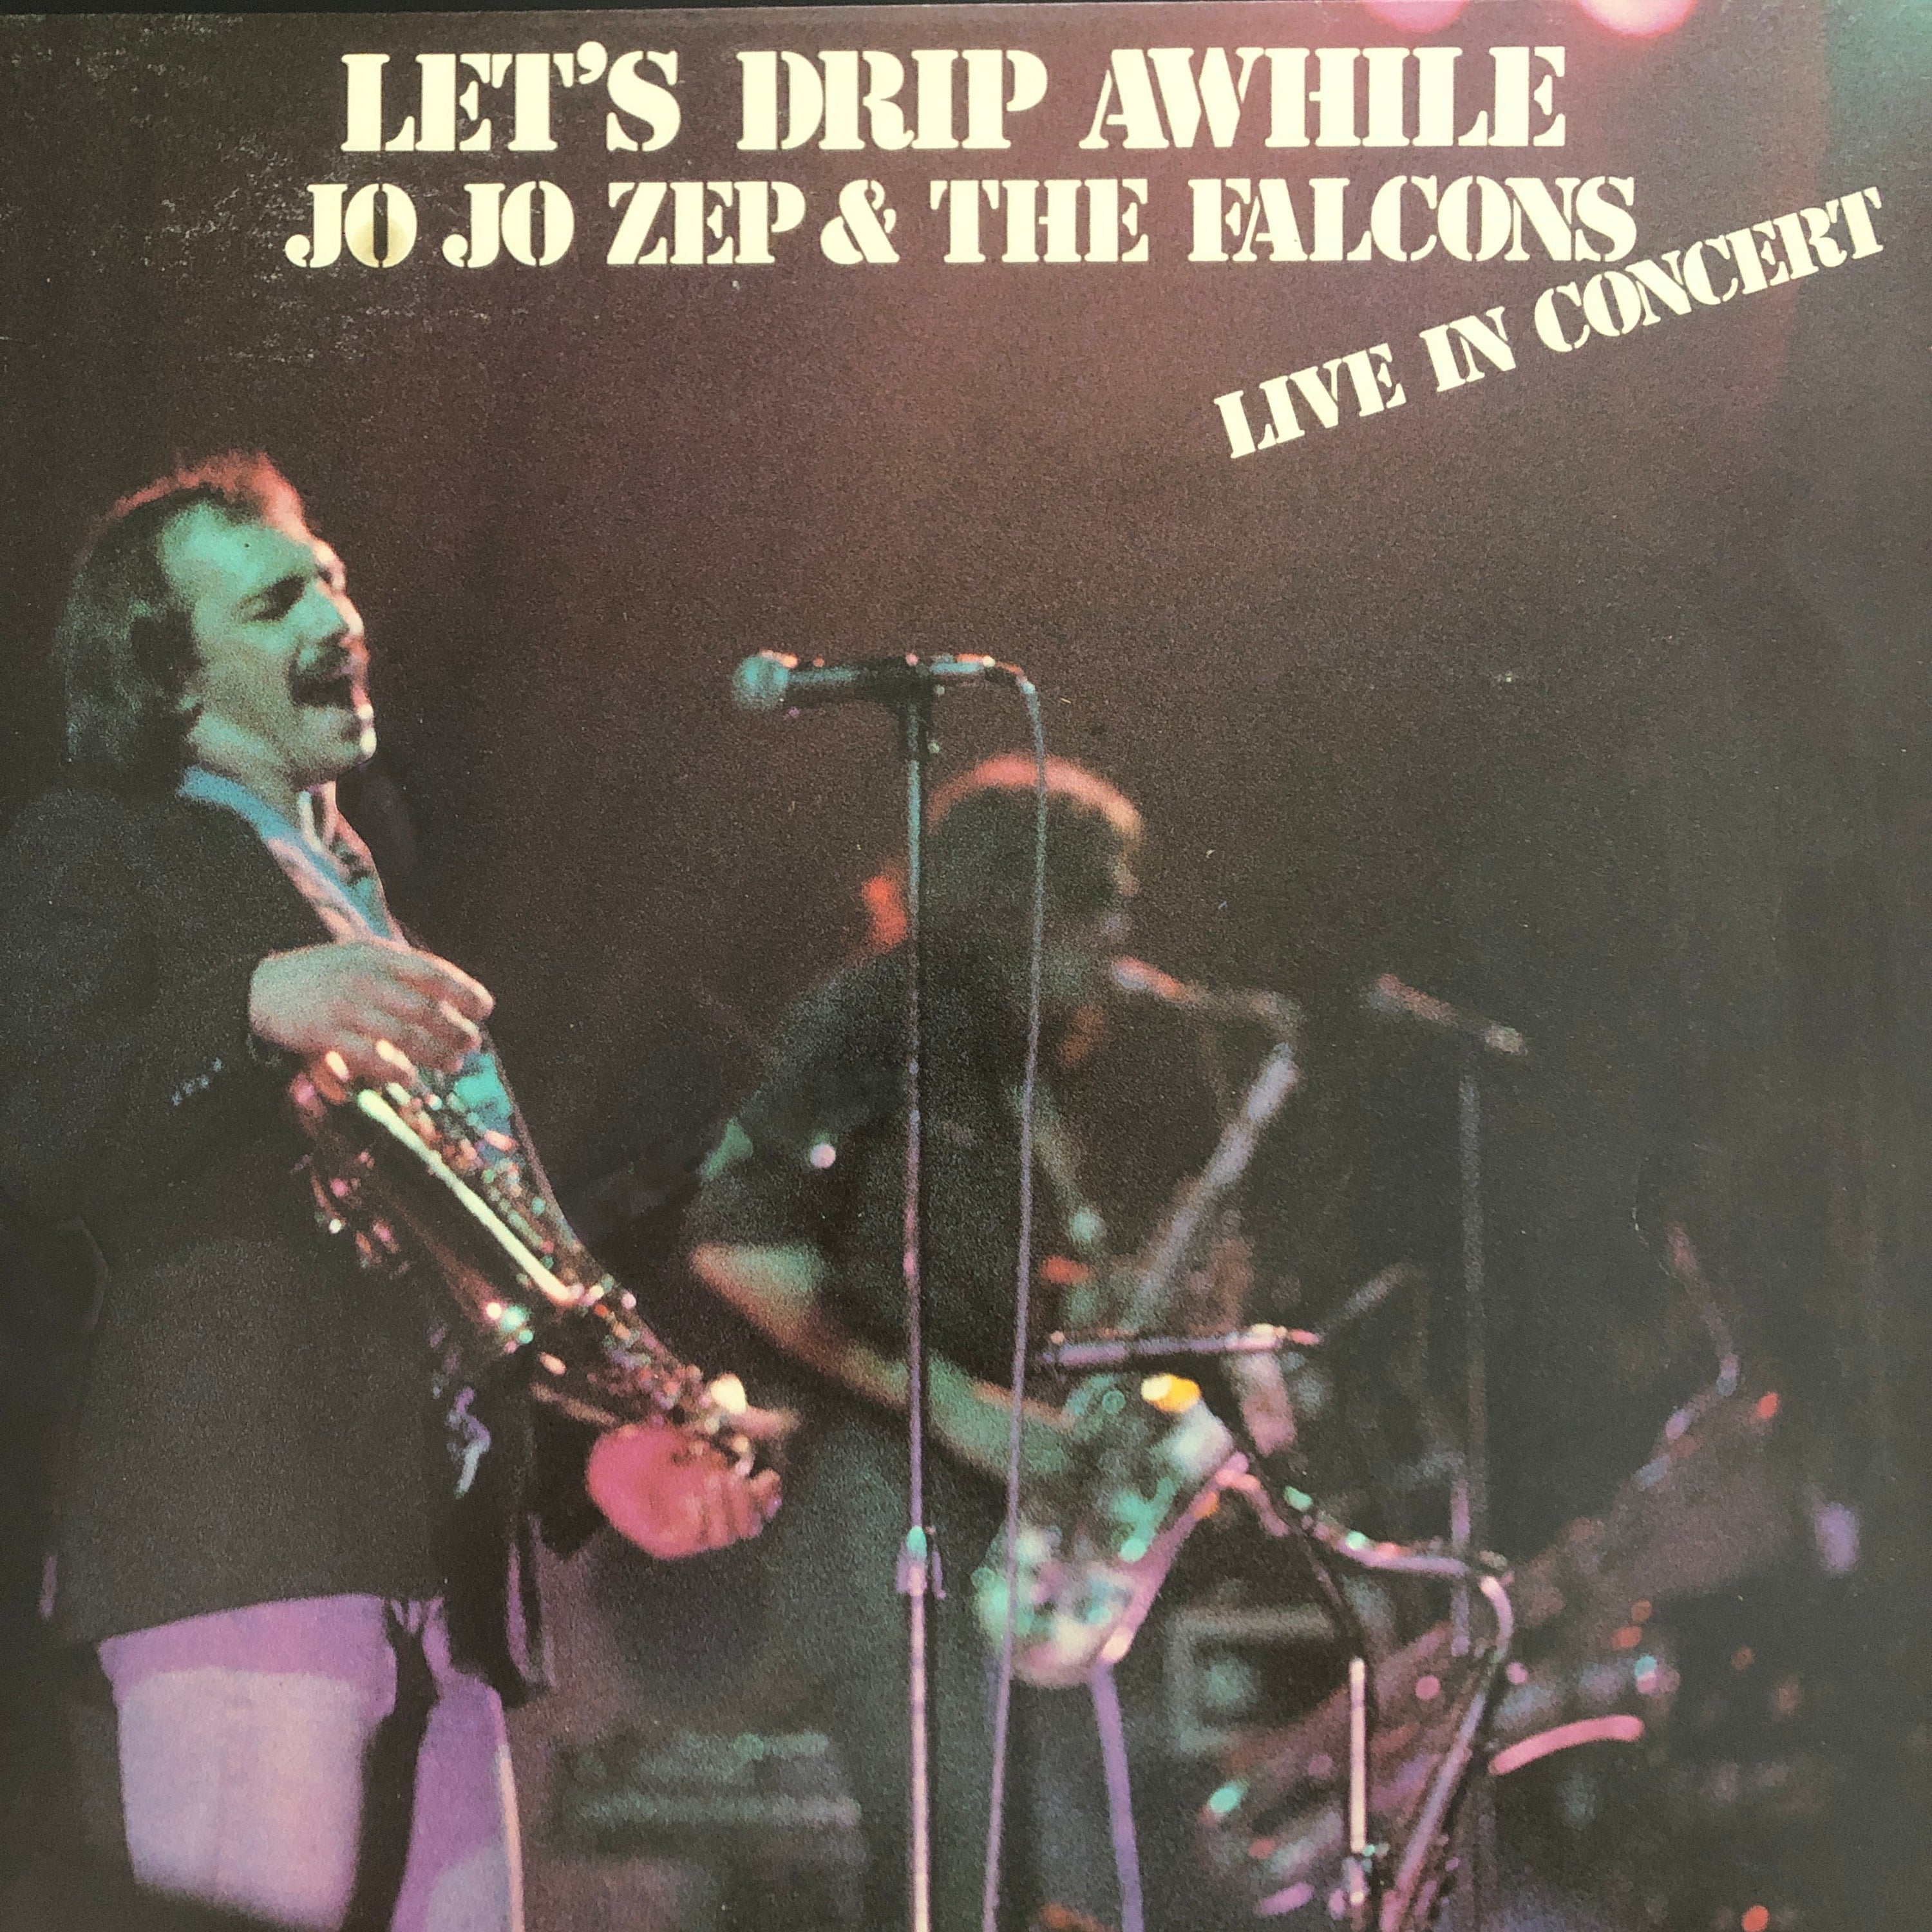 Jo Jo Zep & The Falcons | Let's Drip Awhile